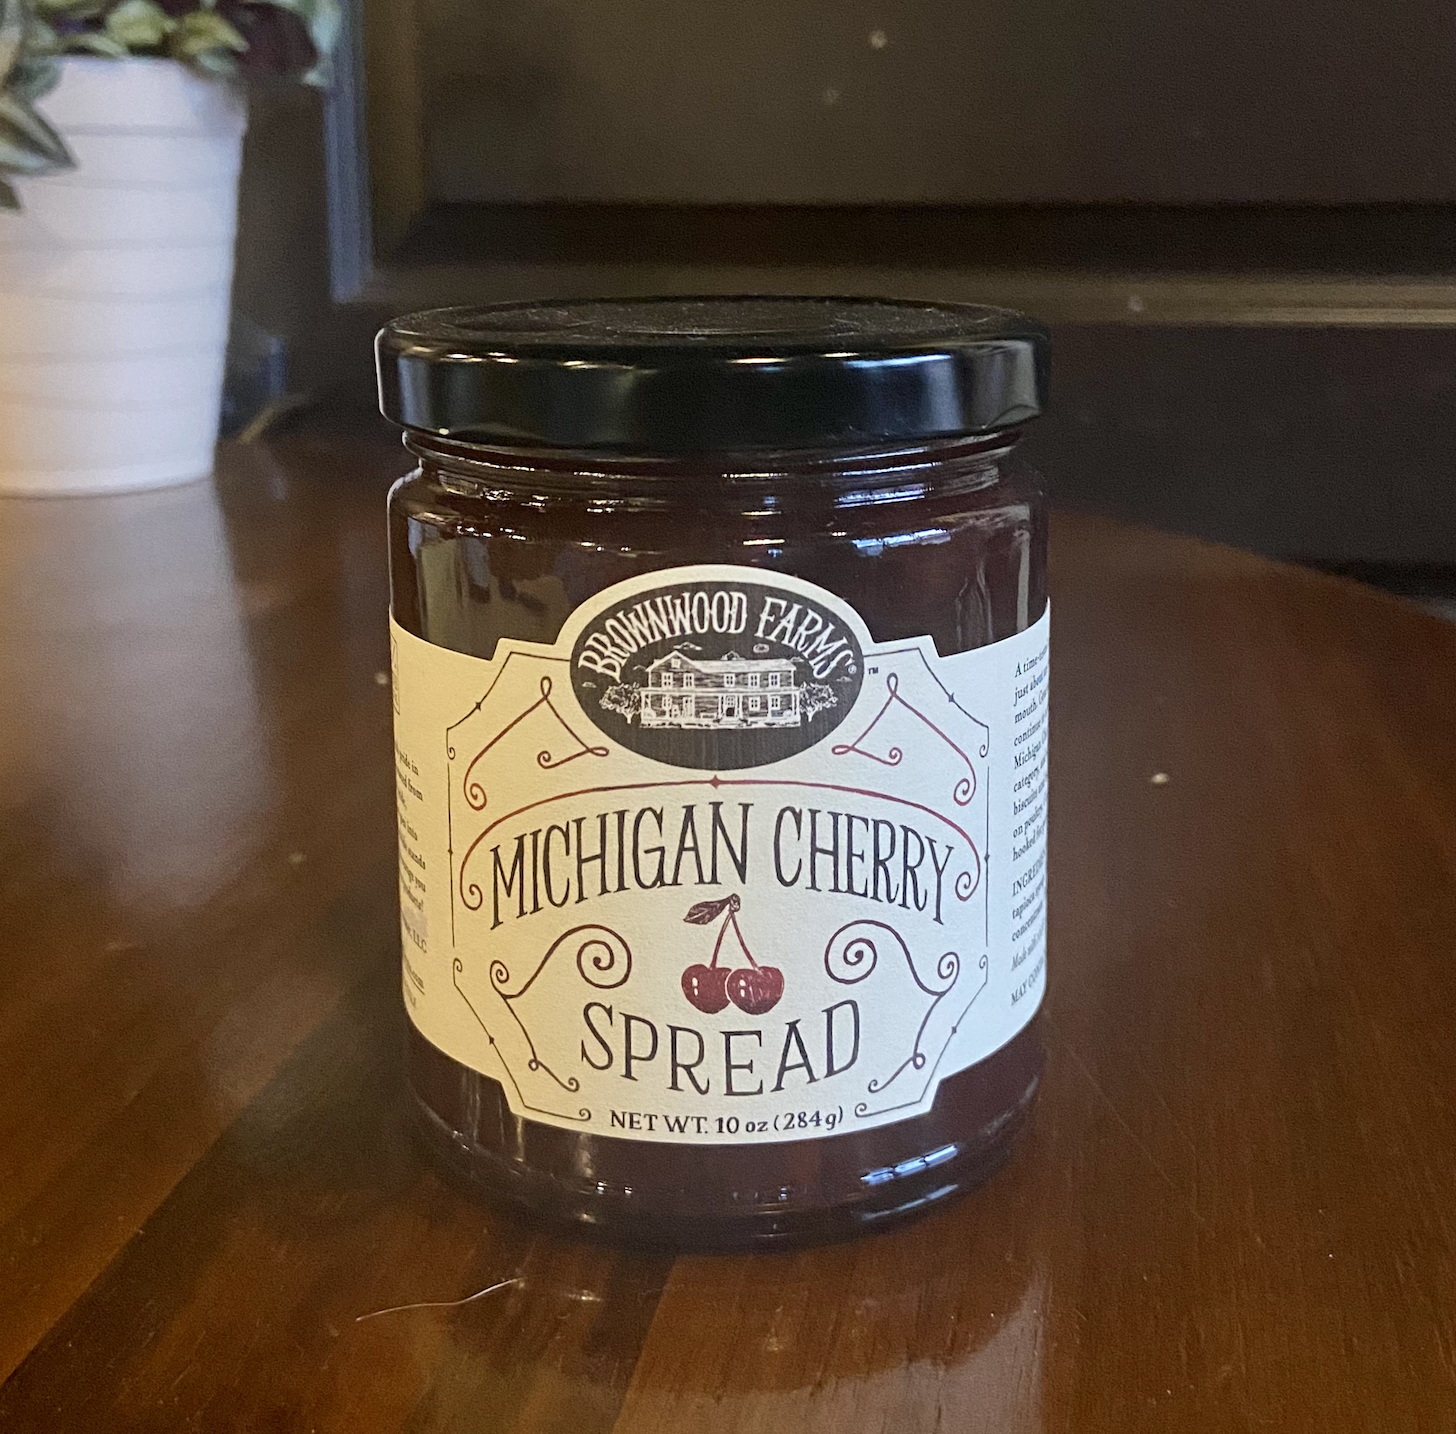 Picture Brownwood Farms Michigan Cherry Spread